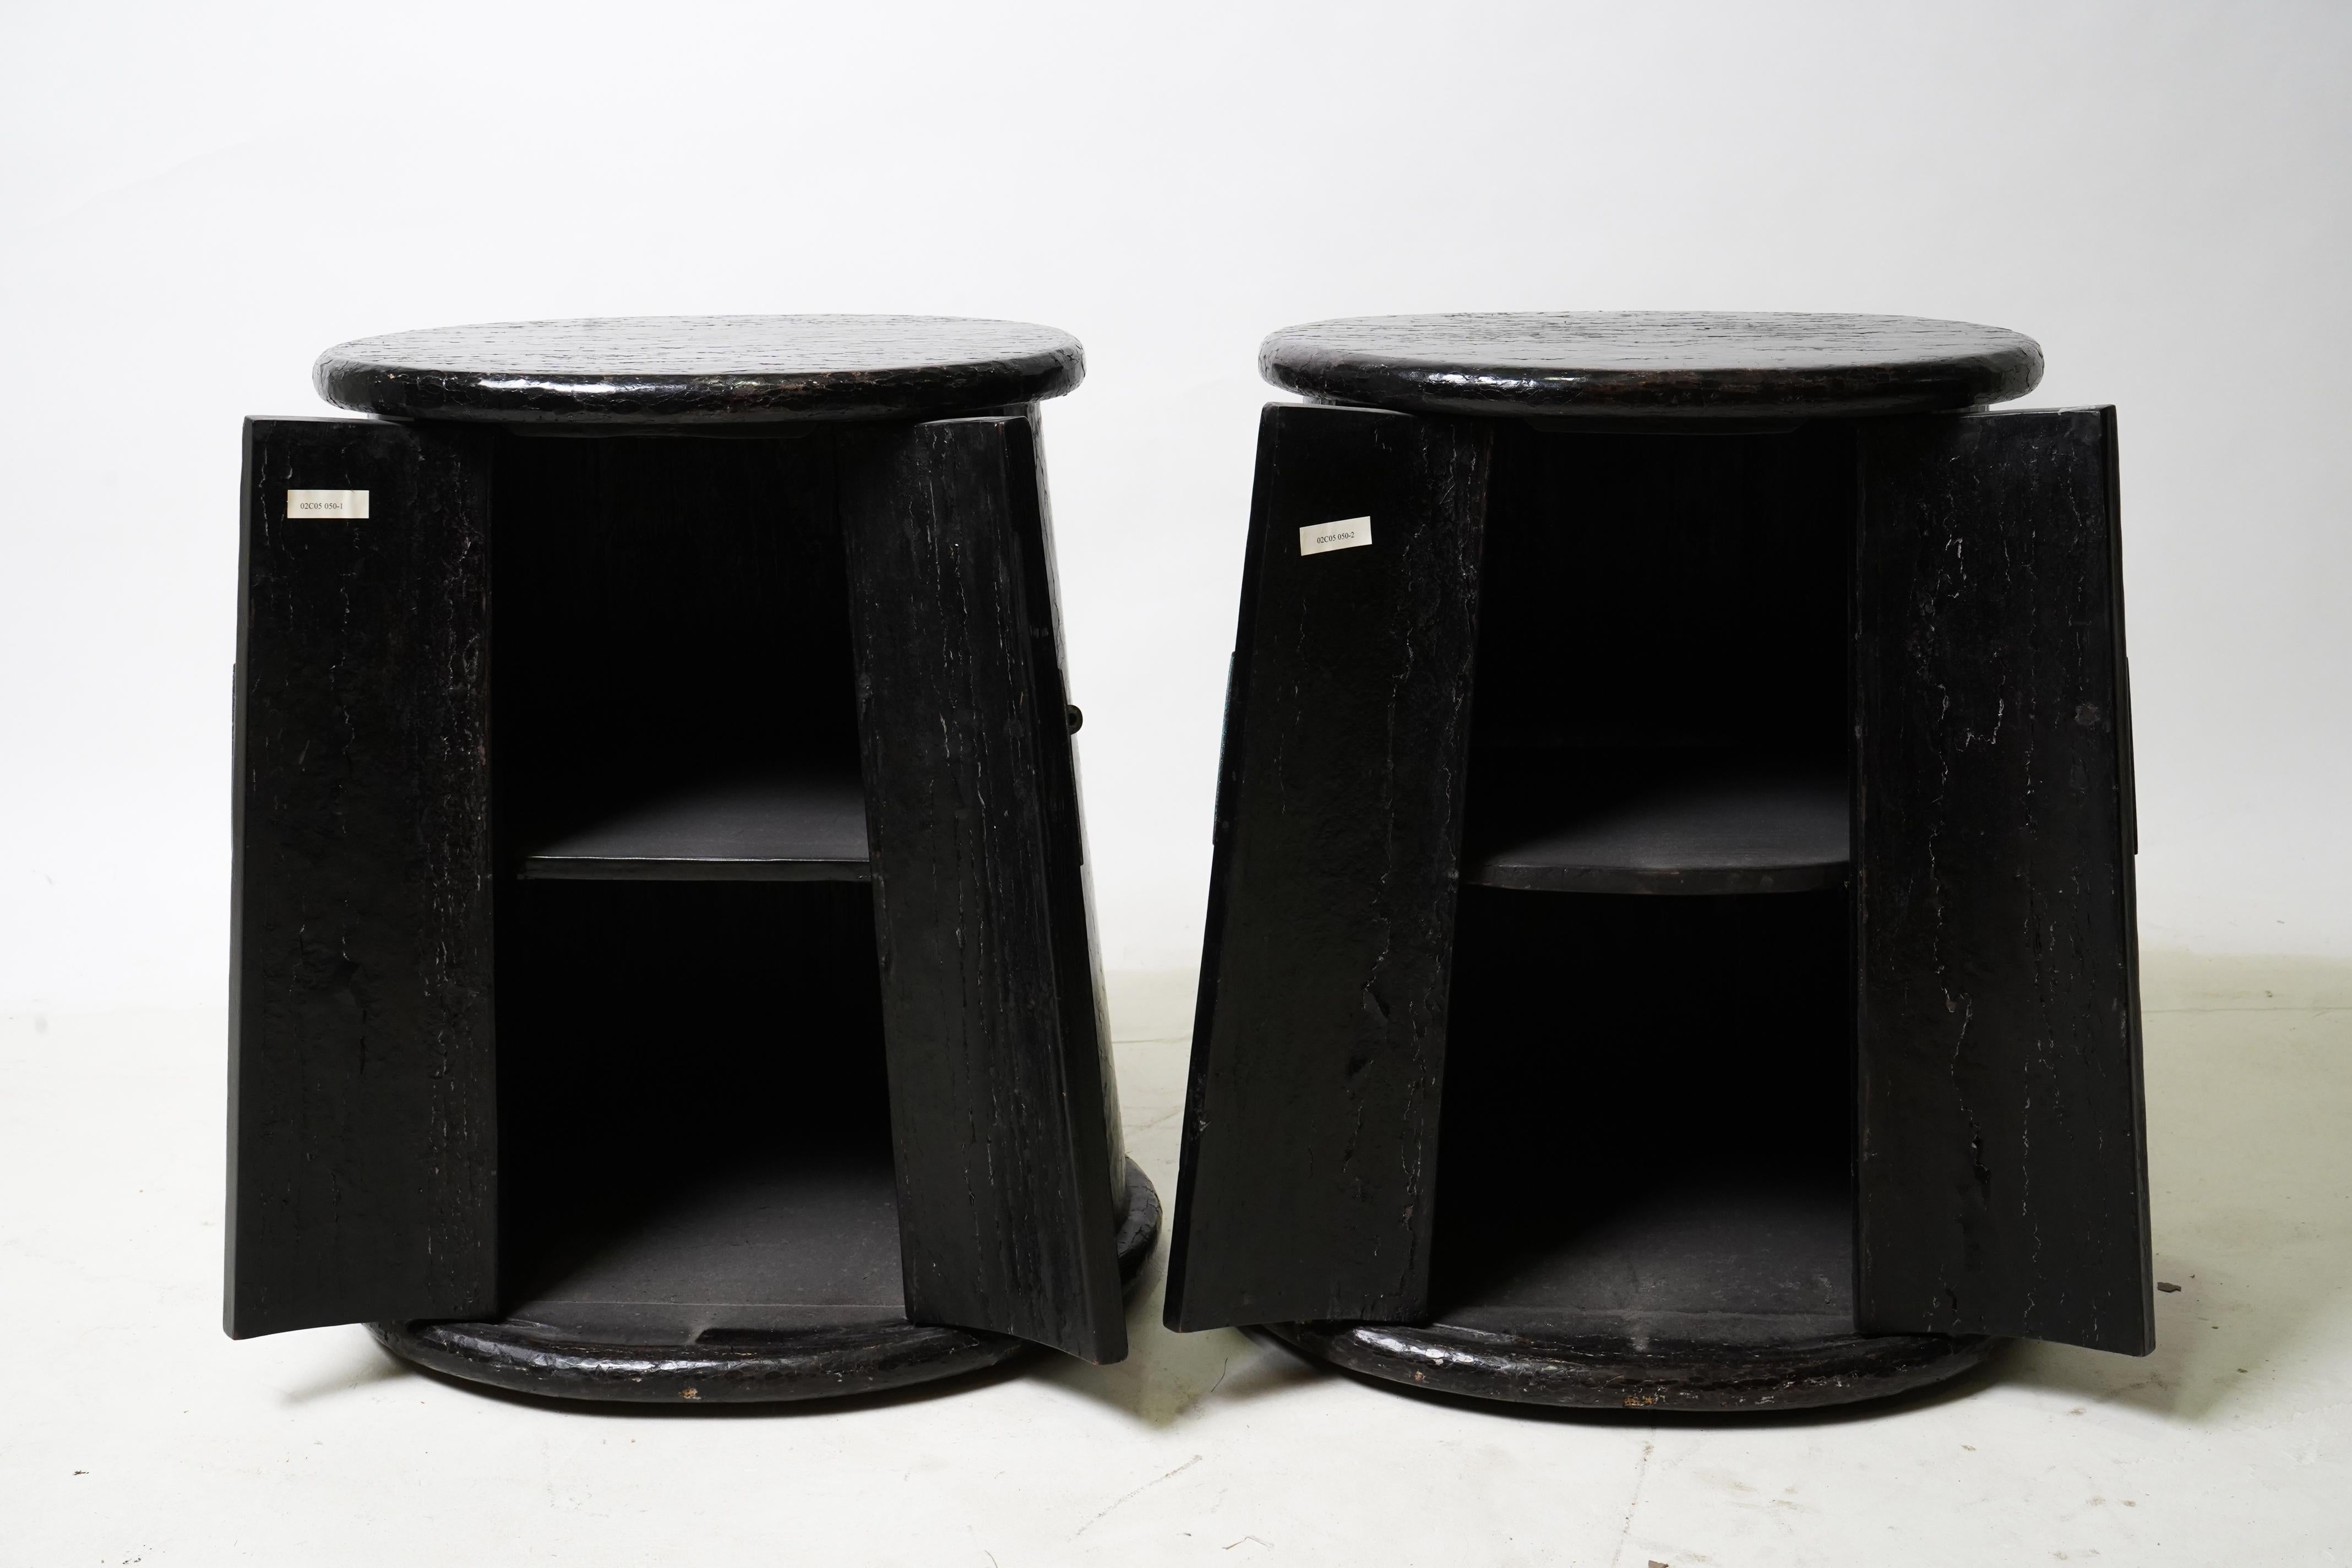 These highly unusual fir wood side chests are found only in Shanxi Province, in the northern part of China, near Beijing. Their tapered shape is highlighted by black lacquer, which has been enhanced by a layer of French polish. The crackled tops are